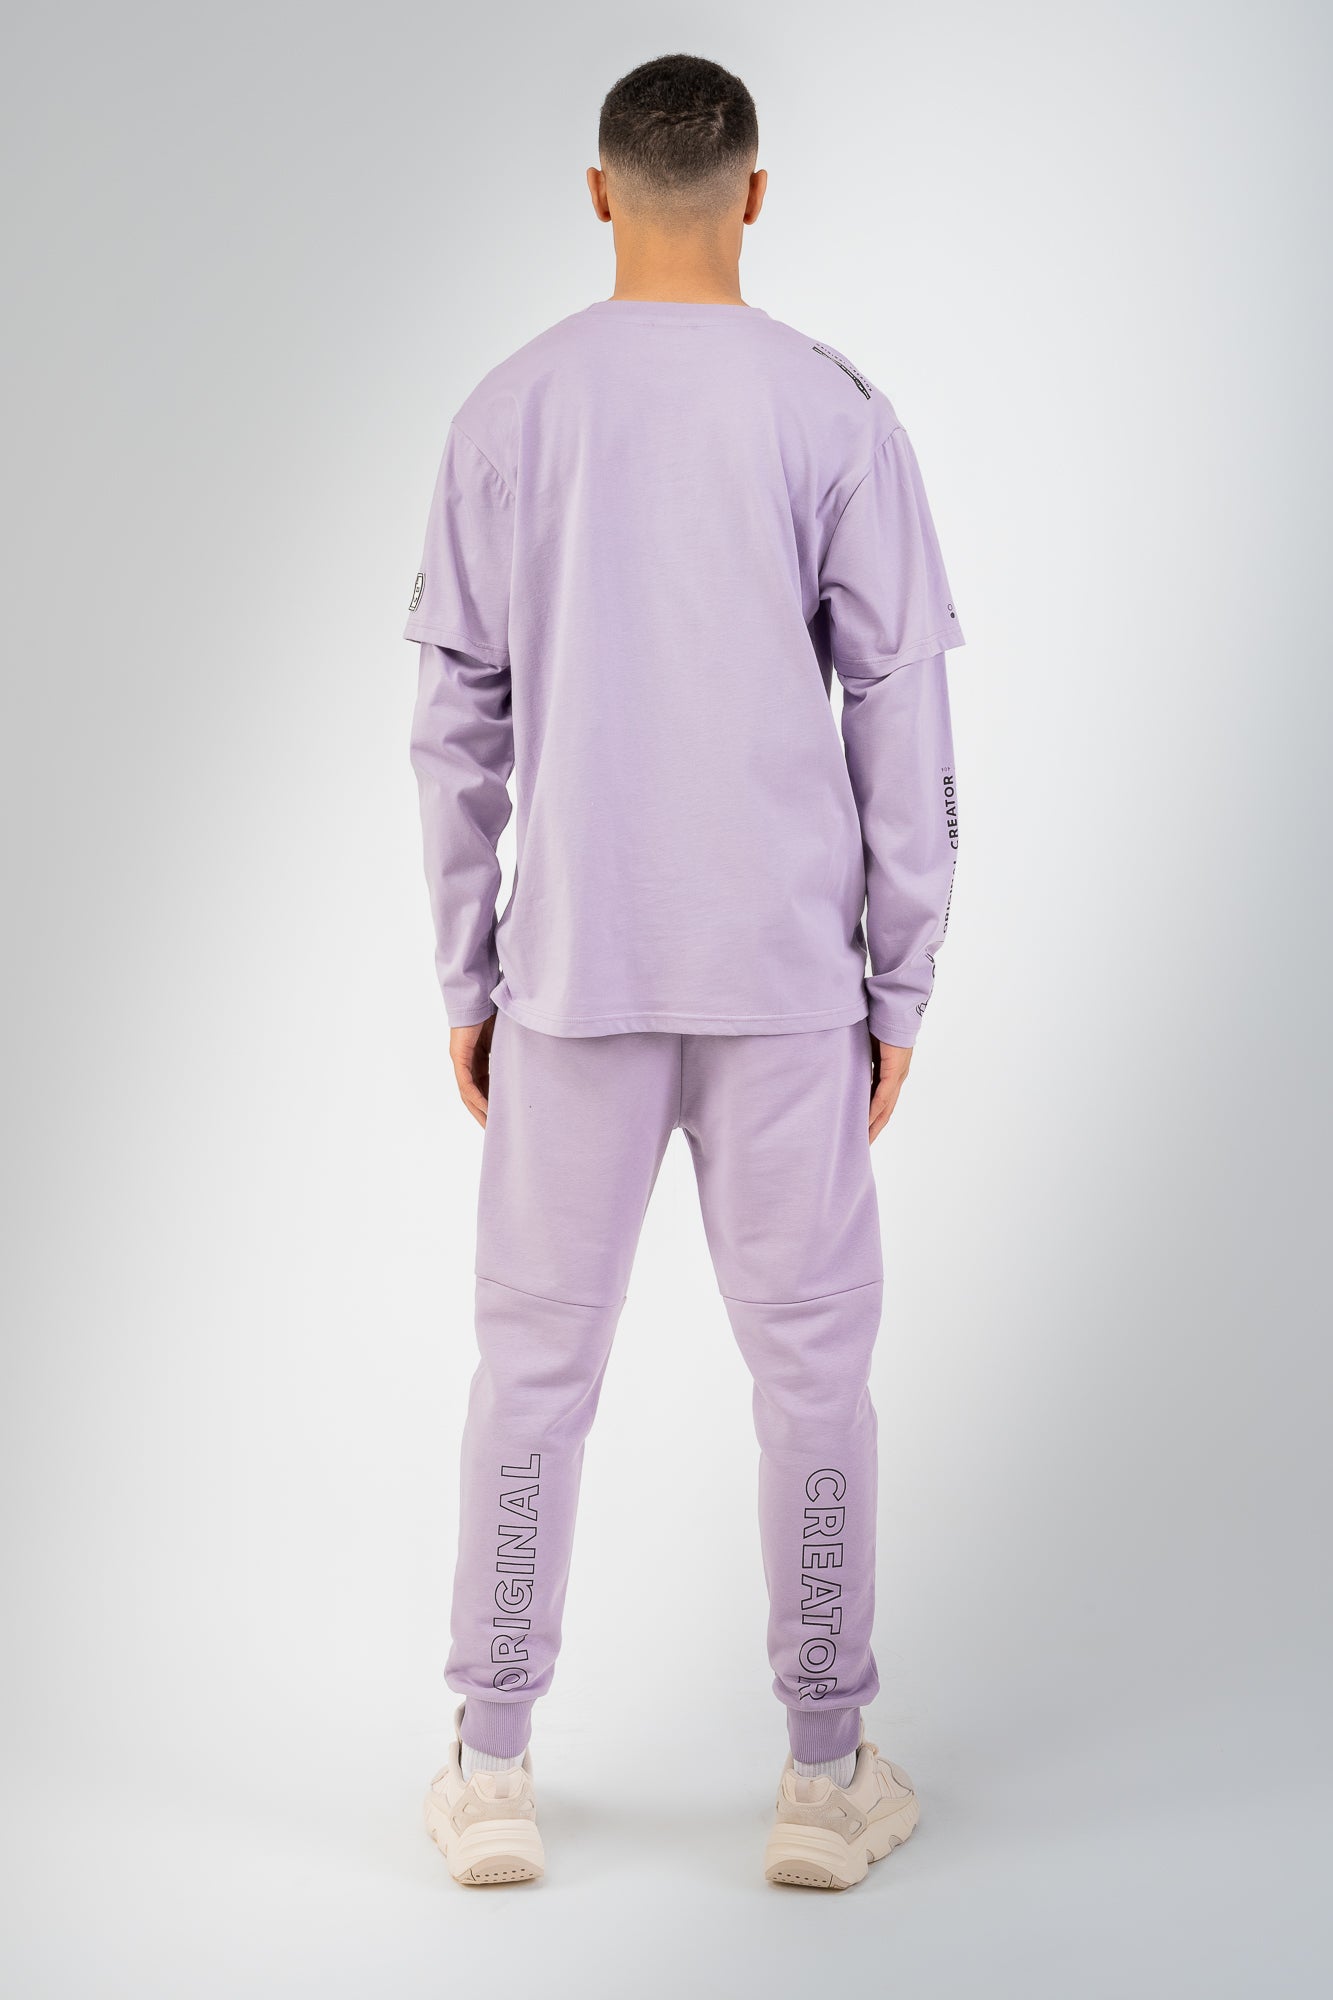 Error Circuit Layered Sleeved T-Shirt - Faded Lilac